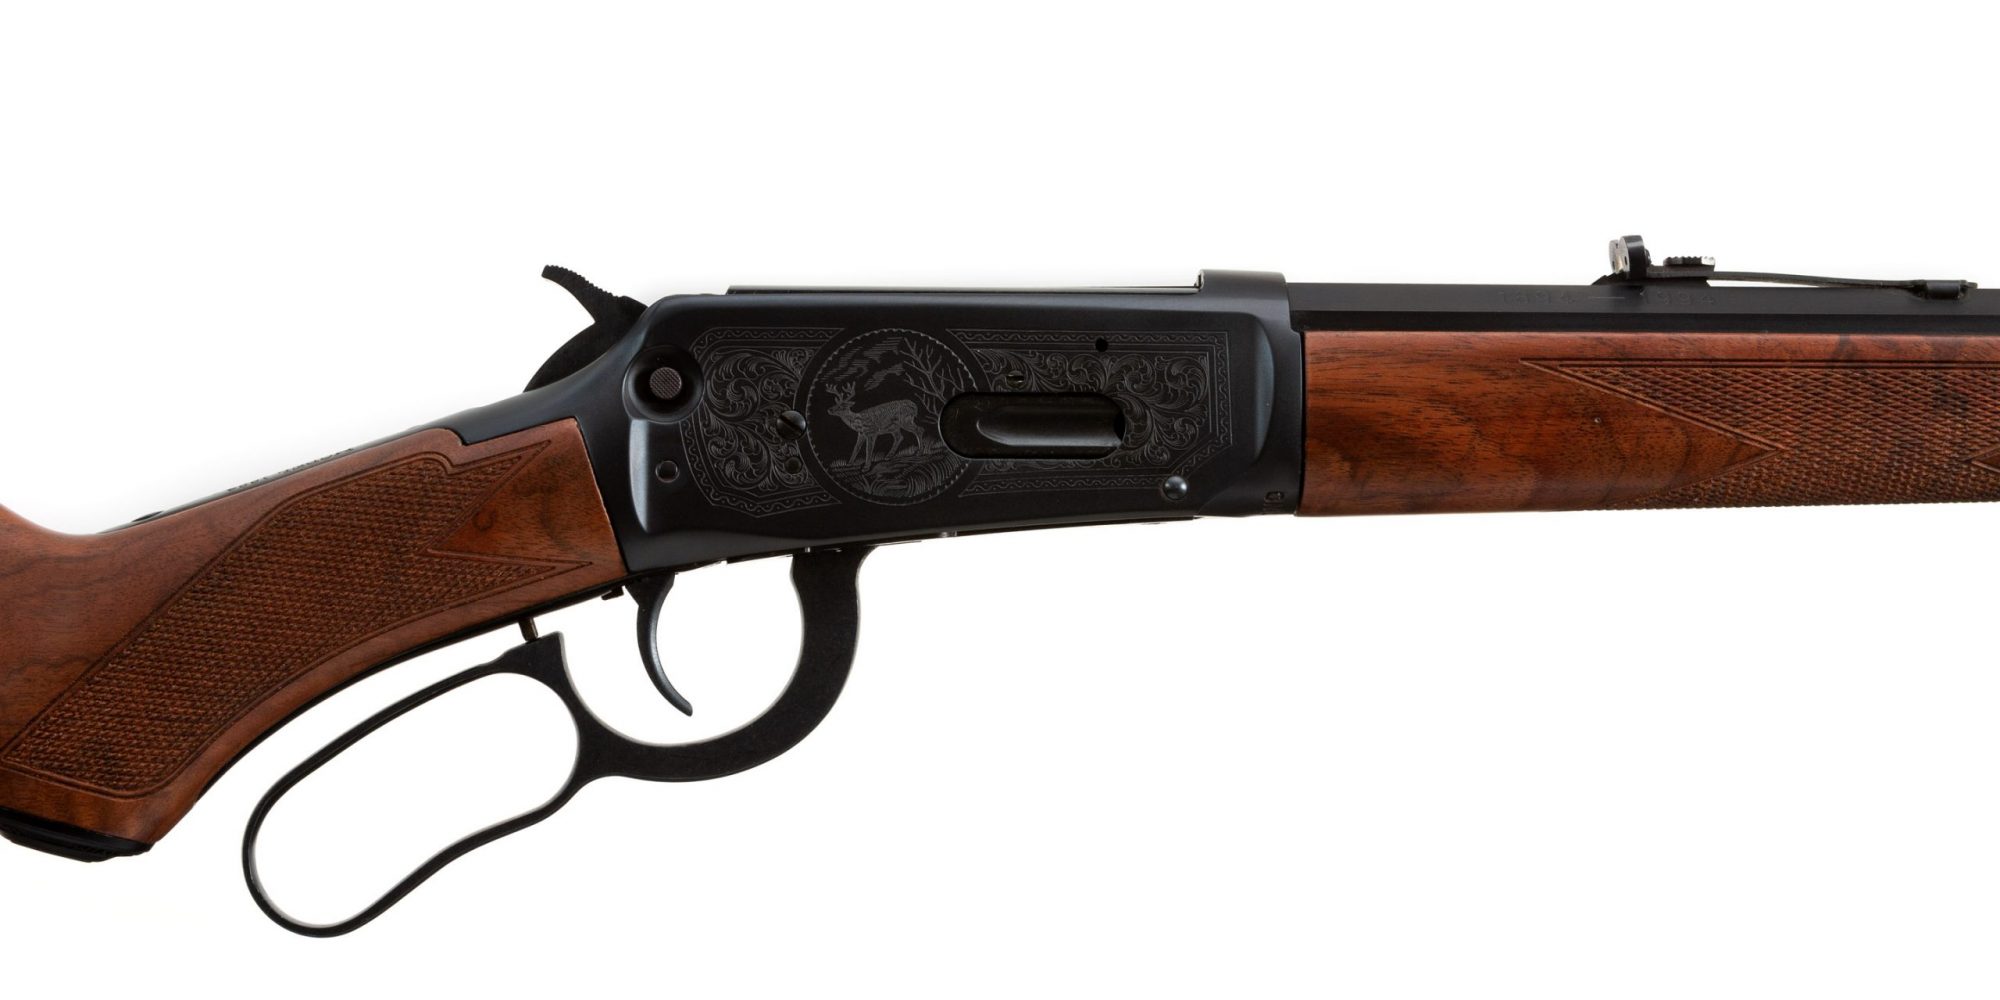 Photo of a pre-owned Winchester Model 94 Limited Edition Grade I Centennial Rifle, for sale by Turnbull Restoration of Bloomfield, NY